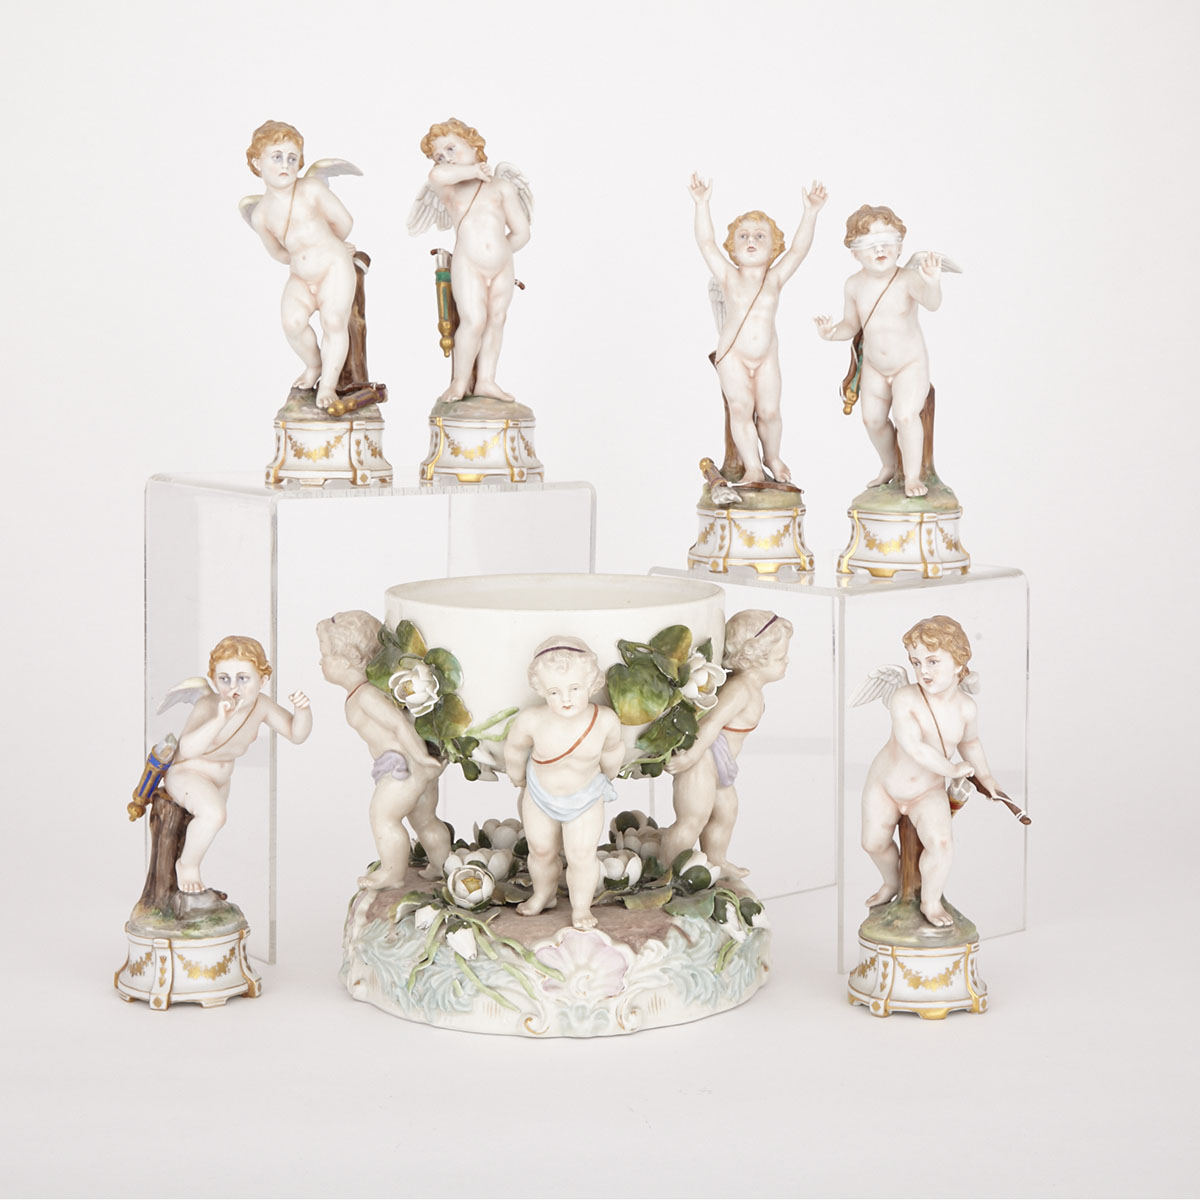 German Porcelain Centrepiece and Six ‘Naples’ Cherub Figurines, late 19th/early 20th century